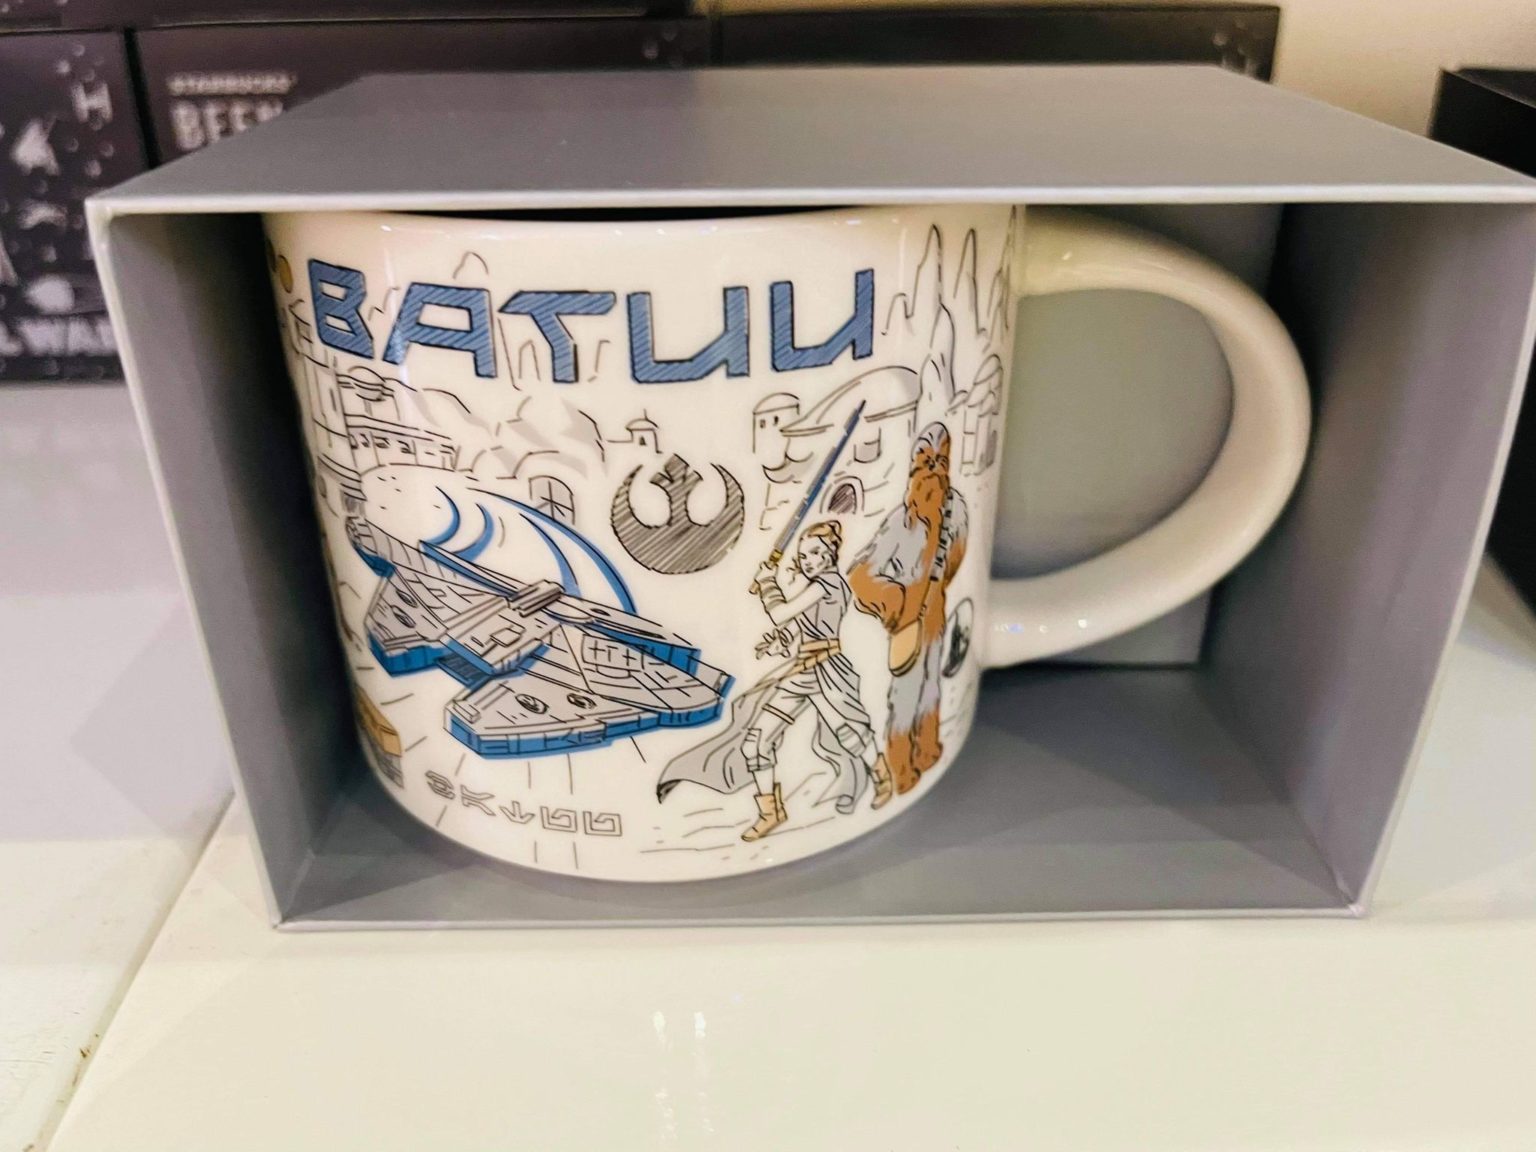 Starbuck 'Been There' Star Wars Mug Series Available at Galaxy's Edge